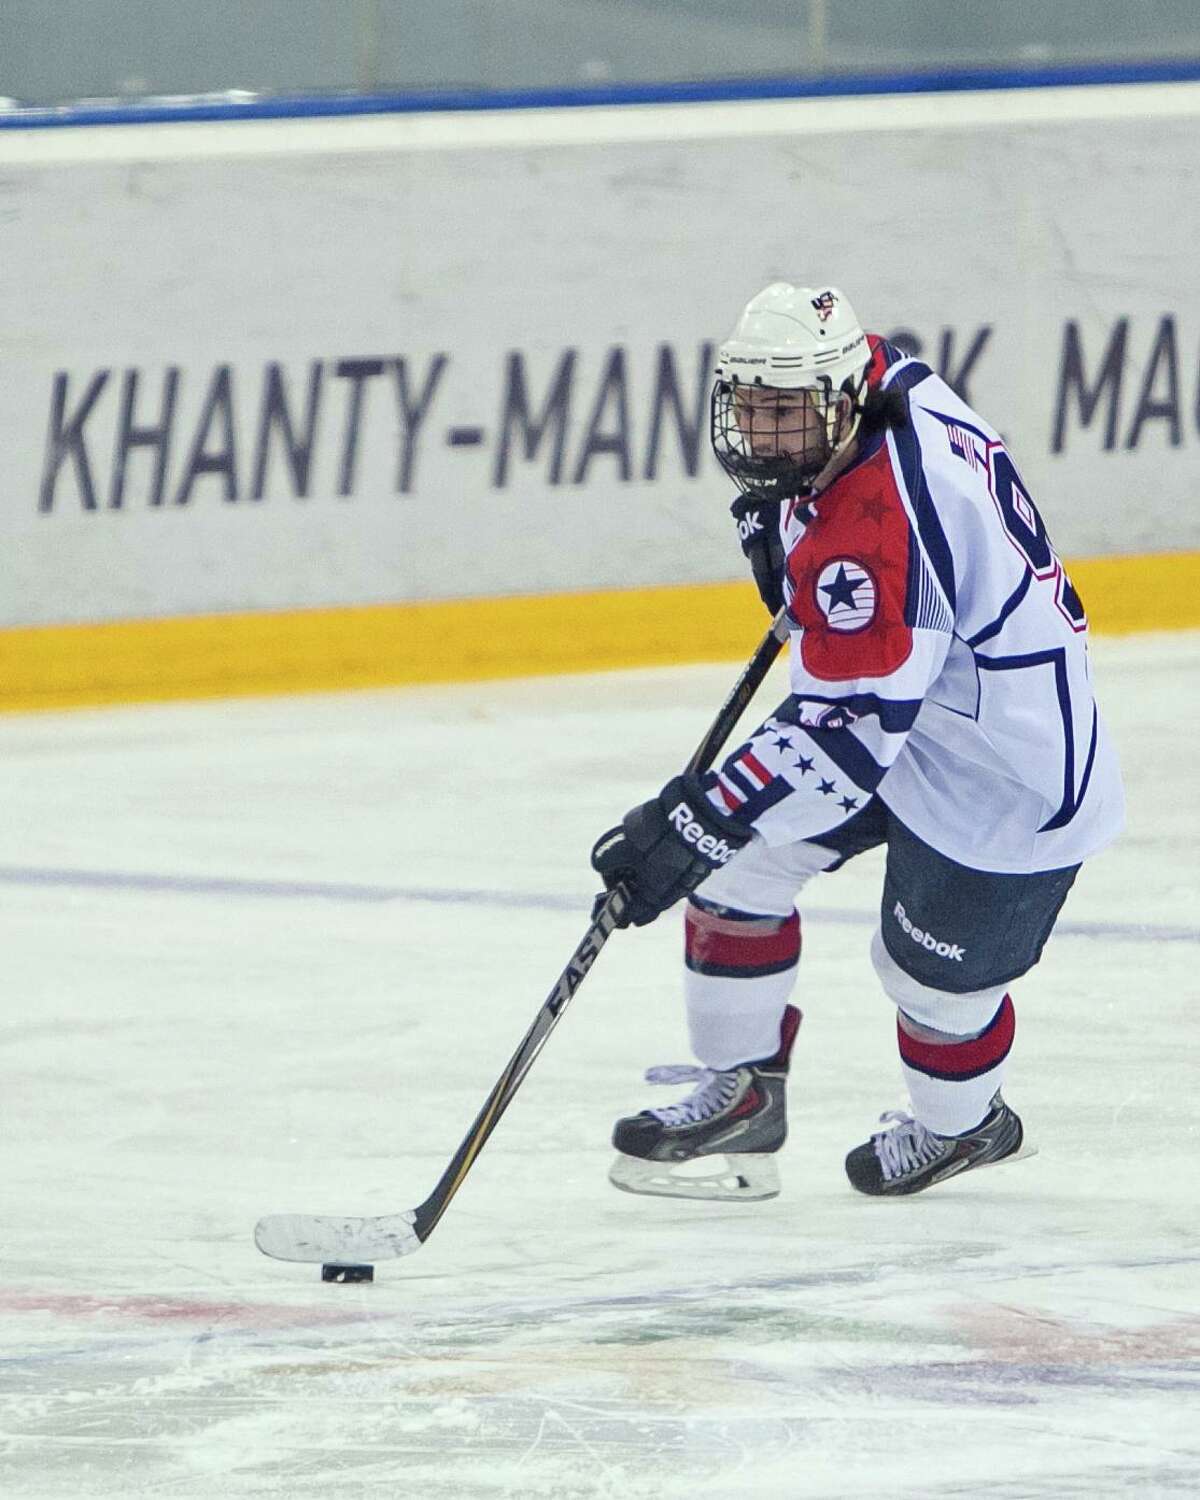 Peter Gintoli of Shelton won a bronze medal last month at the 2015 Winter Deaflympics in Russia. Gintoli, a junior forward at Salve Regina University in Rhode Island, played on Team USA with his brother, Garrett.